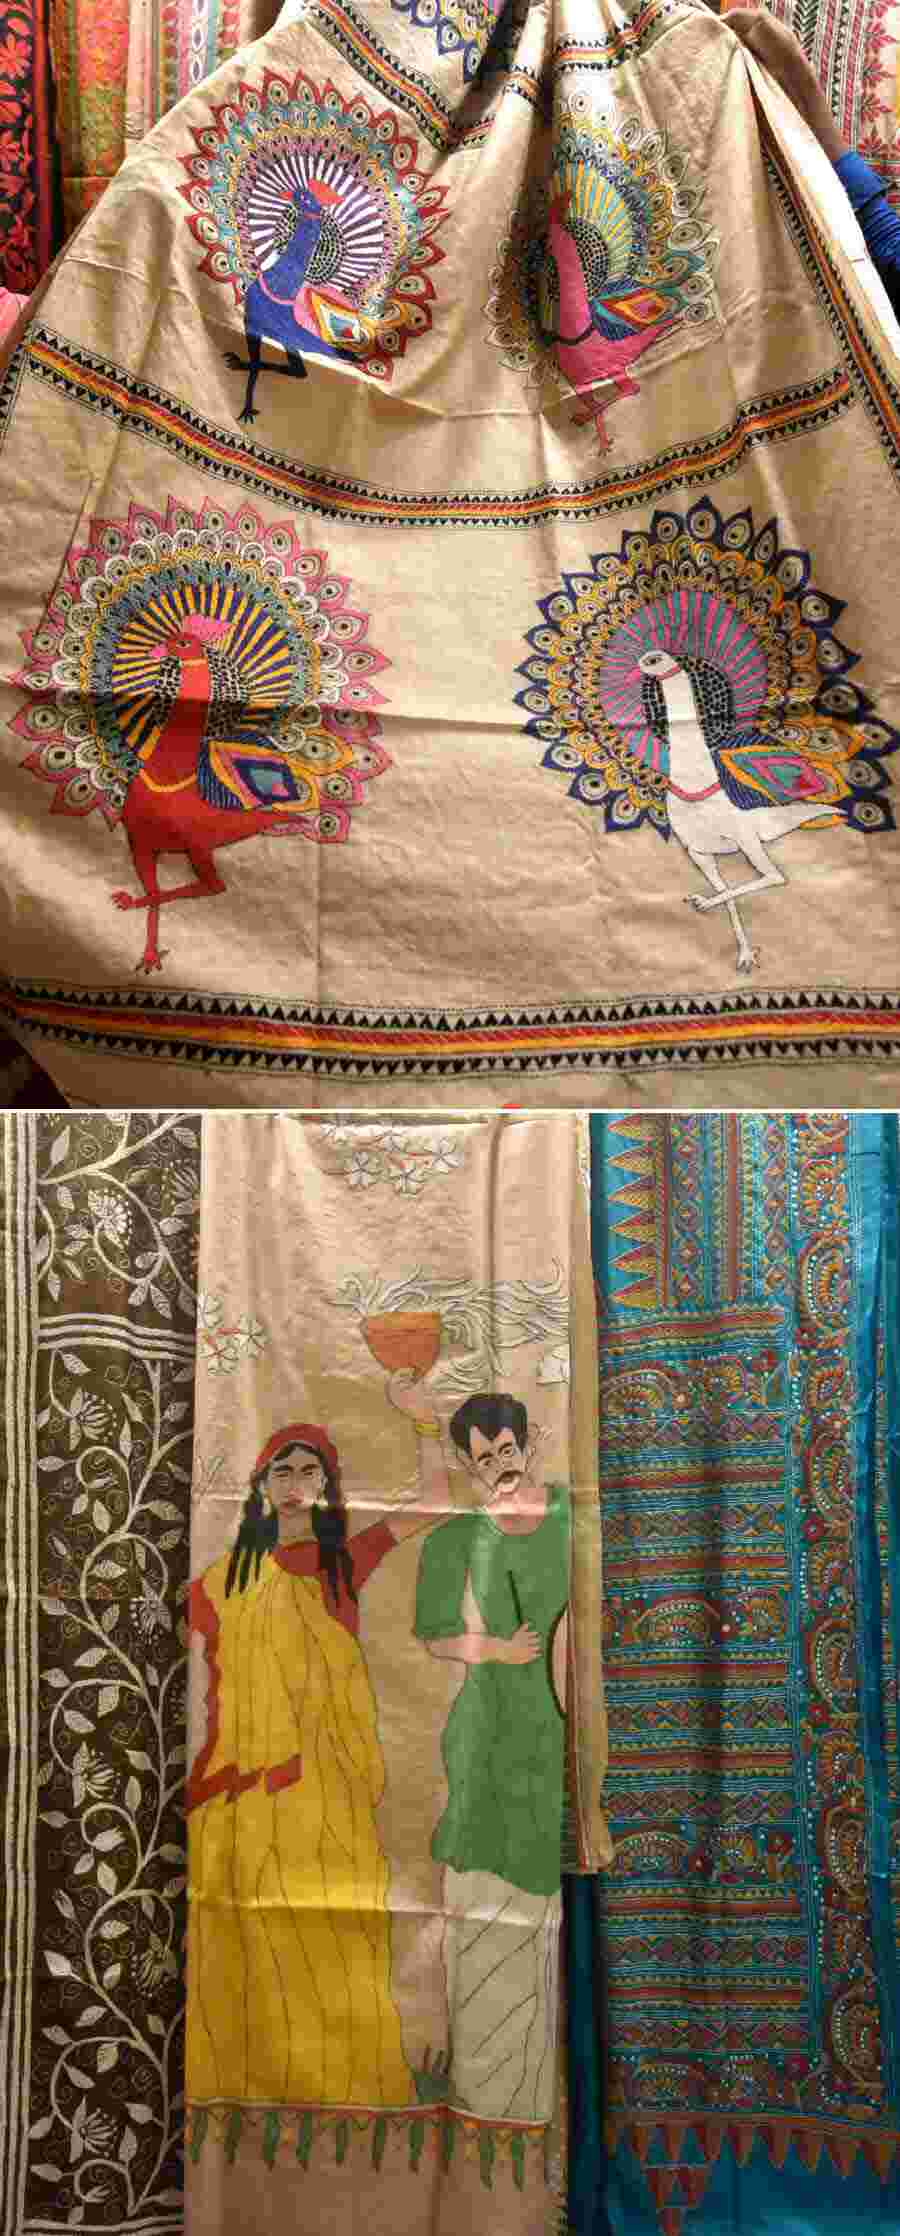 ‘Nakshi kantha’ has its origin in the centuries-old tradition of quilt-making. Old cloth would be stitched together with threads to make quilts (‘kanthas’). Women would wrap up their household chores and spend in the afternoons doing embroidery and chatting with each other. They would embroider different kinds of designs and motifs such as gods, goddesses, animals and the surroundings they lived in. With time more and more designs evolved as ‘nakshi kantha’ embroidery made its way to saris and other garments. ‘Nakshi kantha’ work is also found in Assam, Tripura and Bangladesh. In Bengal ‘nakshi kantha’ came to be taught at Kala Bhavana in Santiniketan as Rabindranath Tagore and his daughter-in-law Purnima Devi started training Santhali women from the nearby villages.